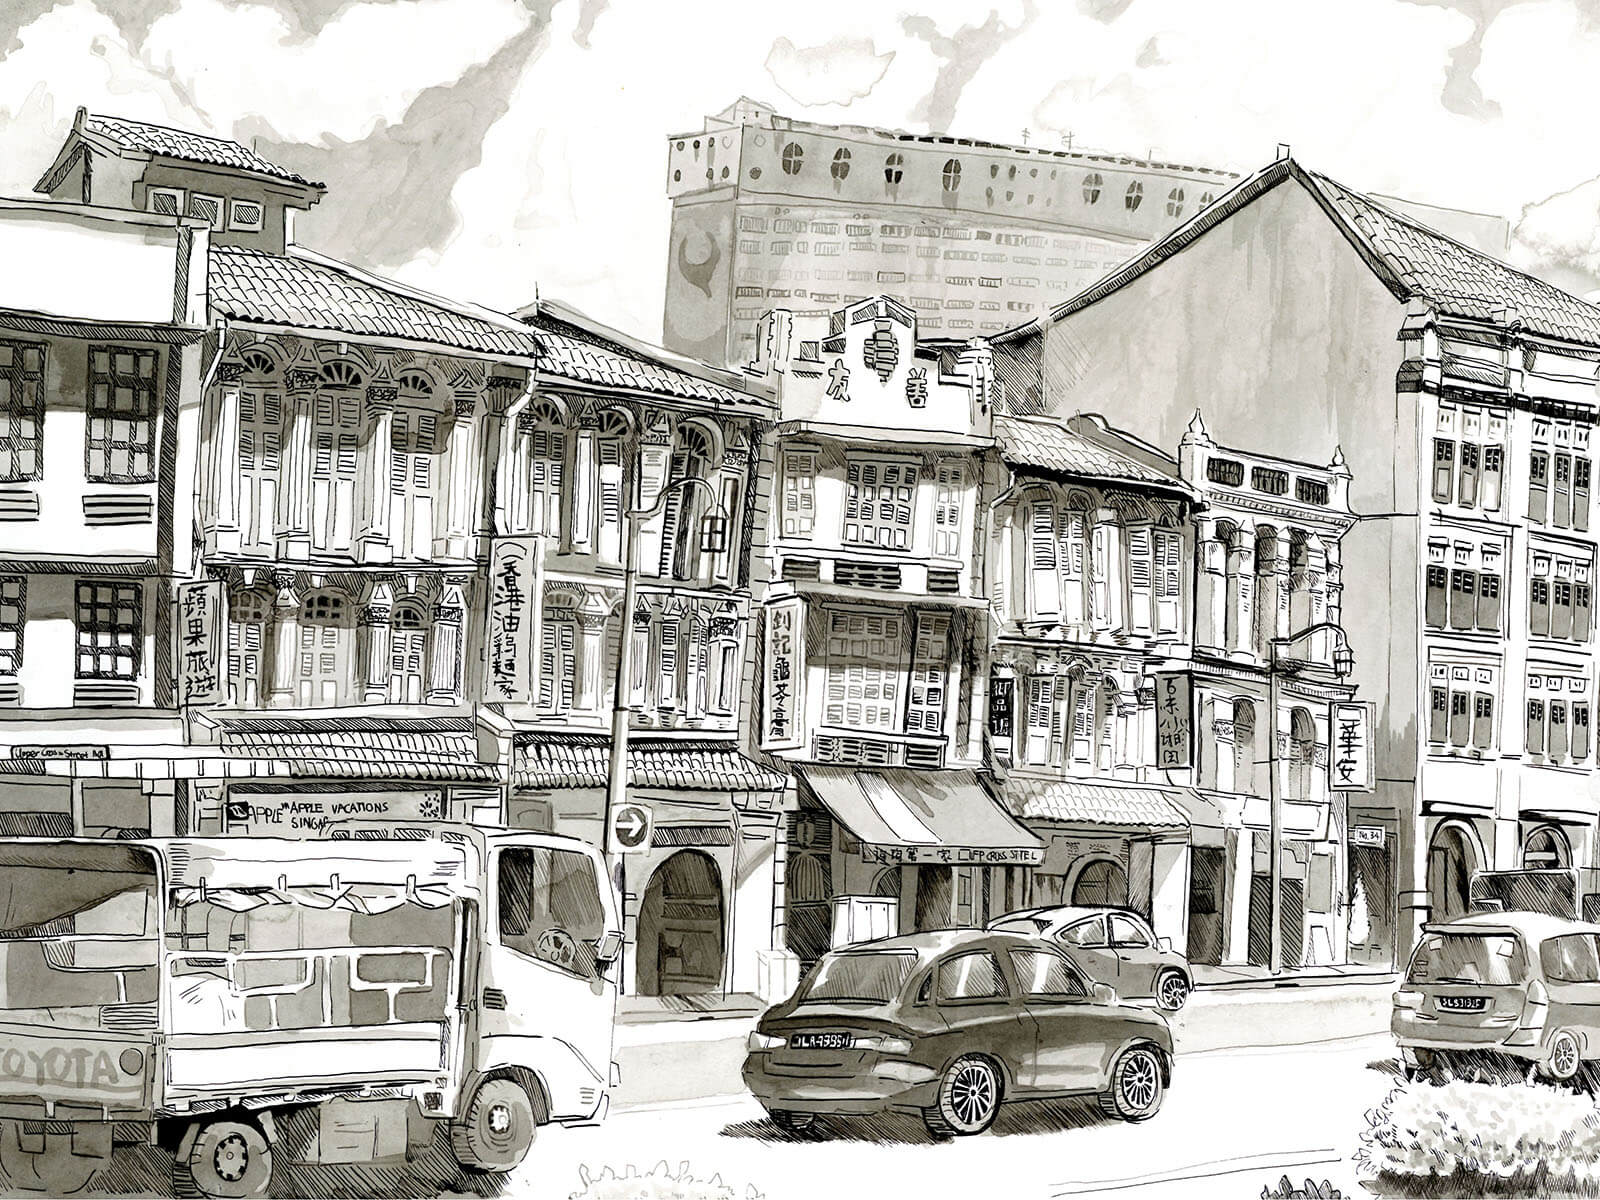 Black-and-White sketch of low-rise buildings in an urban area.